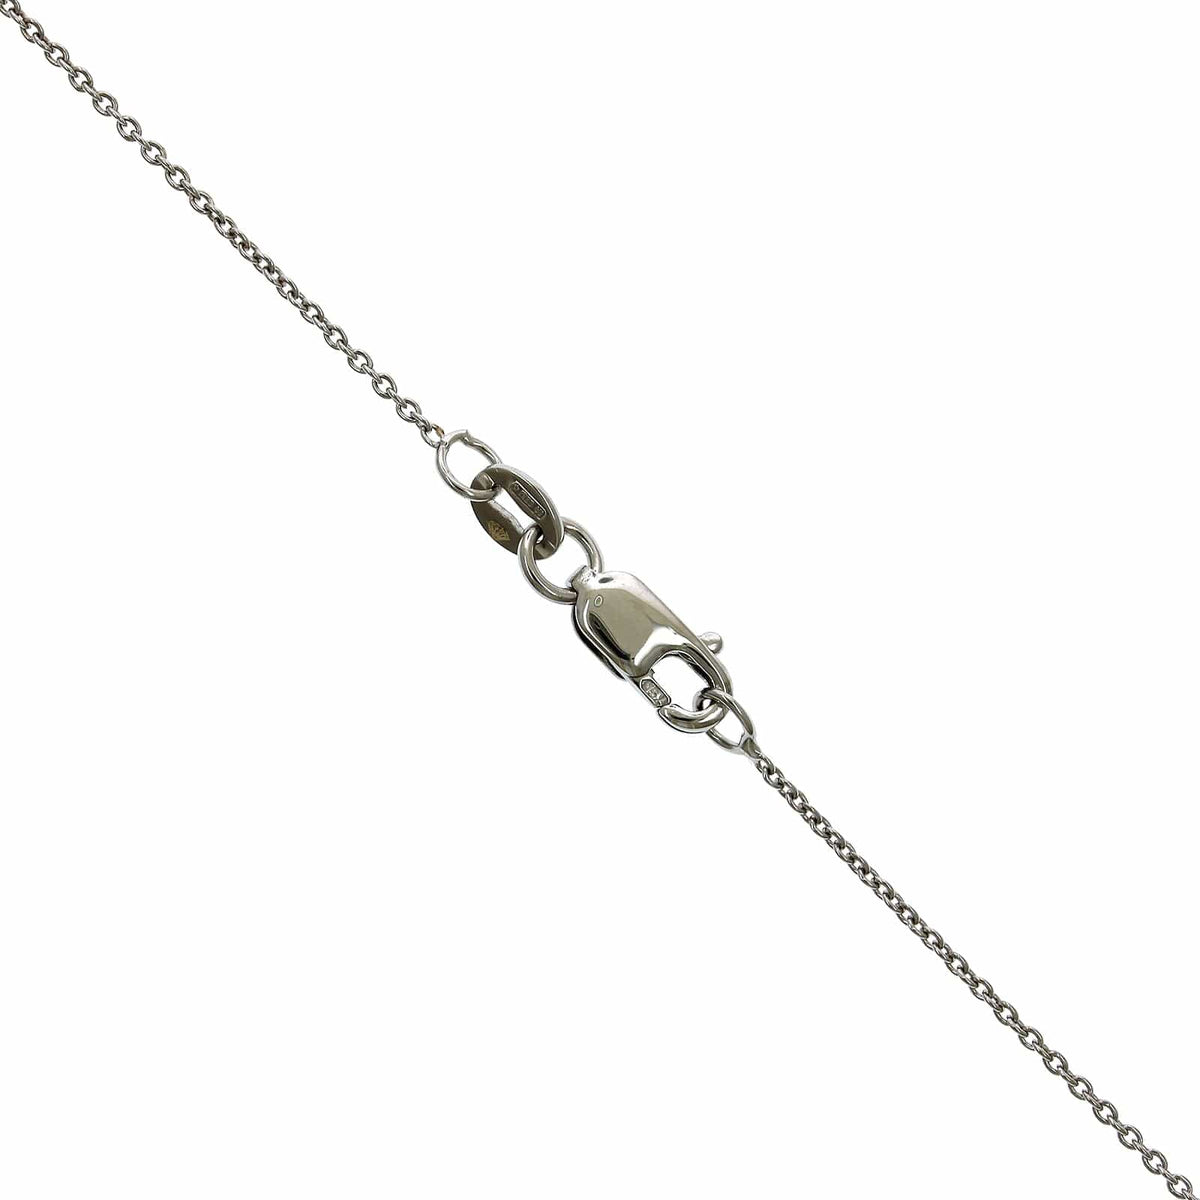 Roberto Coin 18K White Gold "F" Initial Diamond Necklace